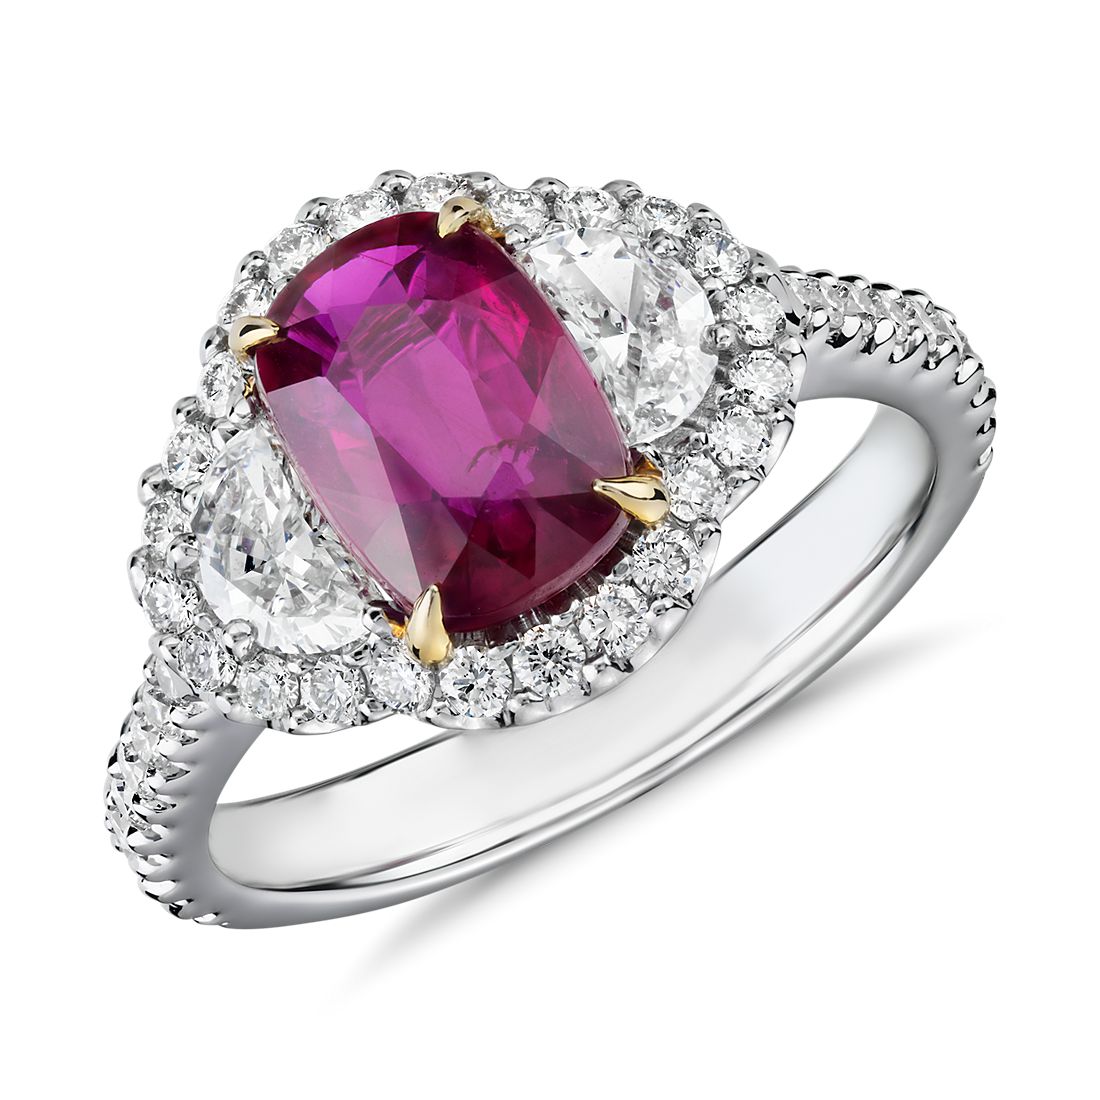 Three-Stone Cushion-Cut Ruby and Half Moon Diamond Halo Ring in 18k White and Yellow Gold (8x6mm)